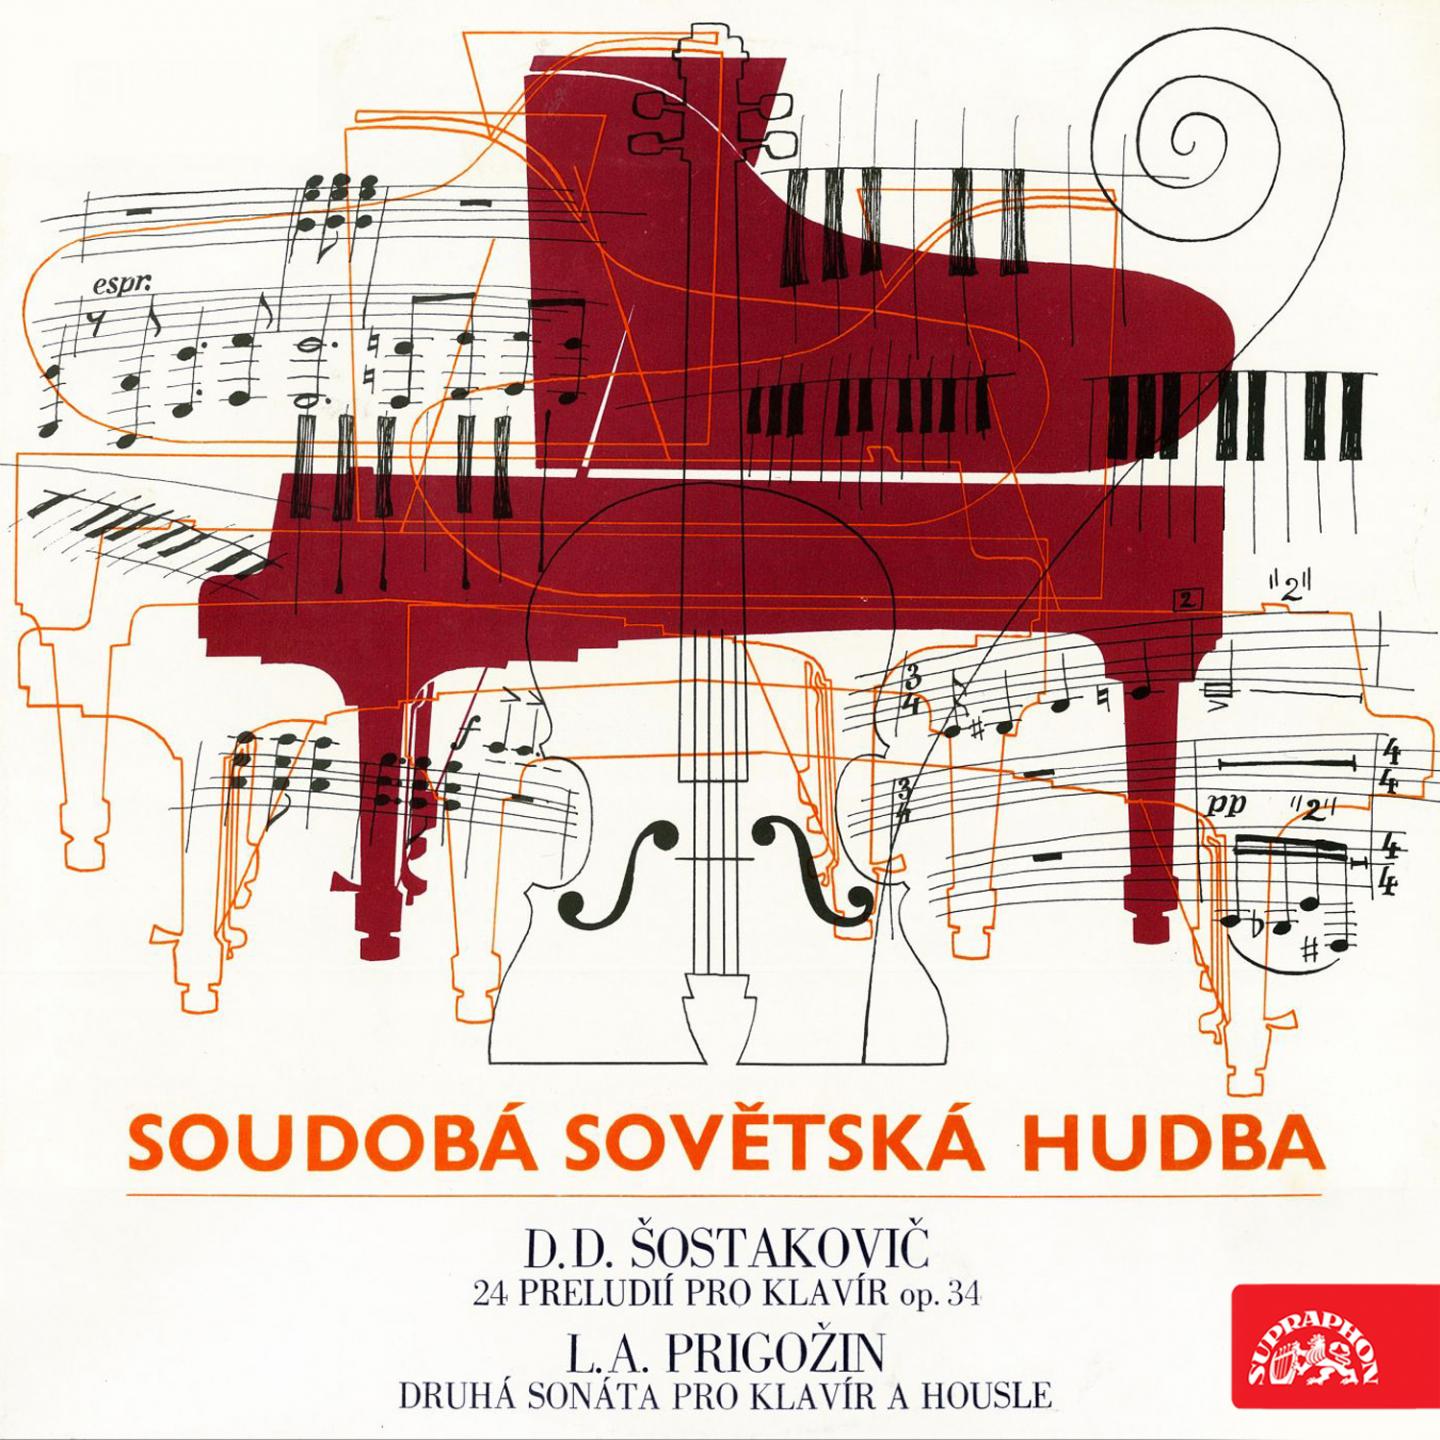 24 Pre ludes for Piano, Op. 34: No. 23